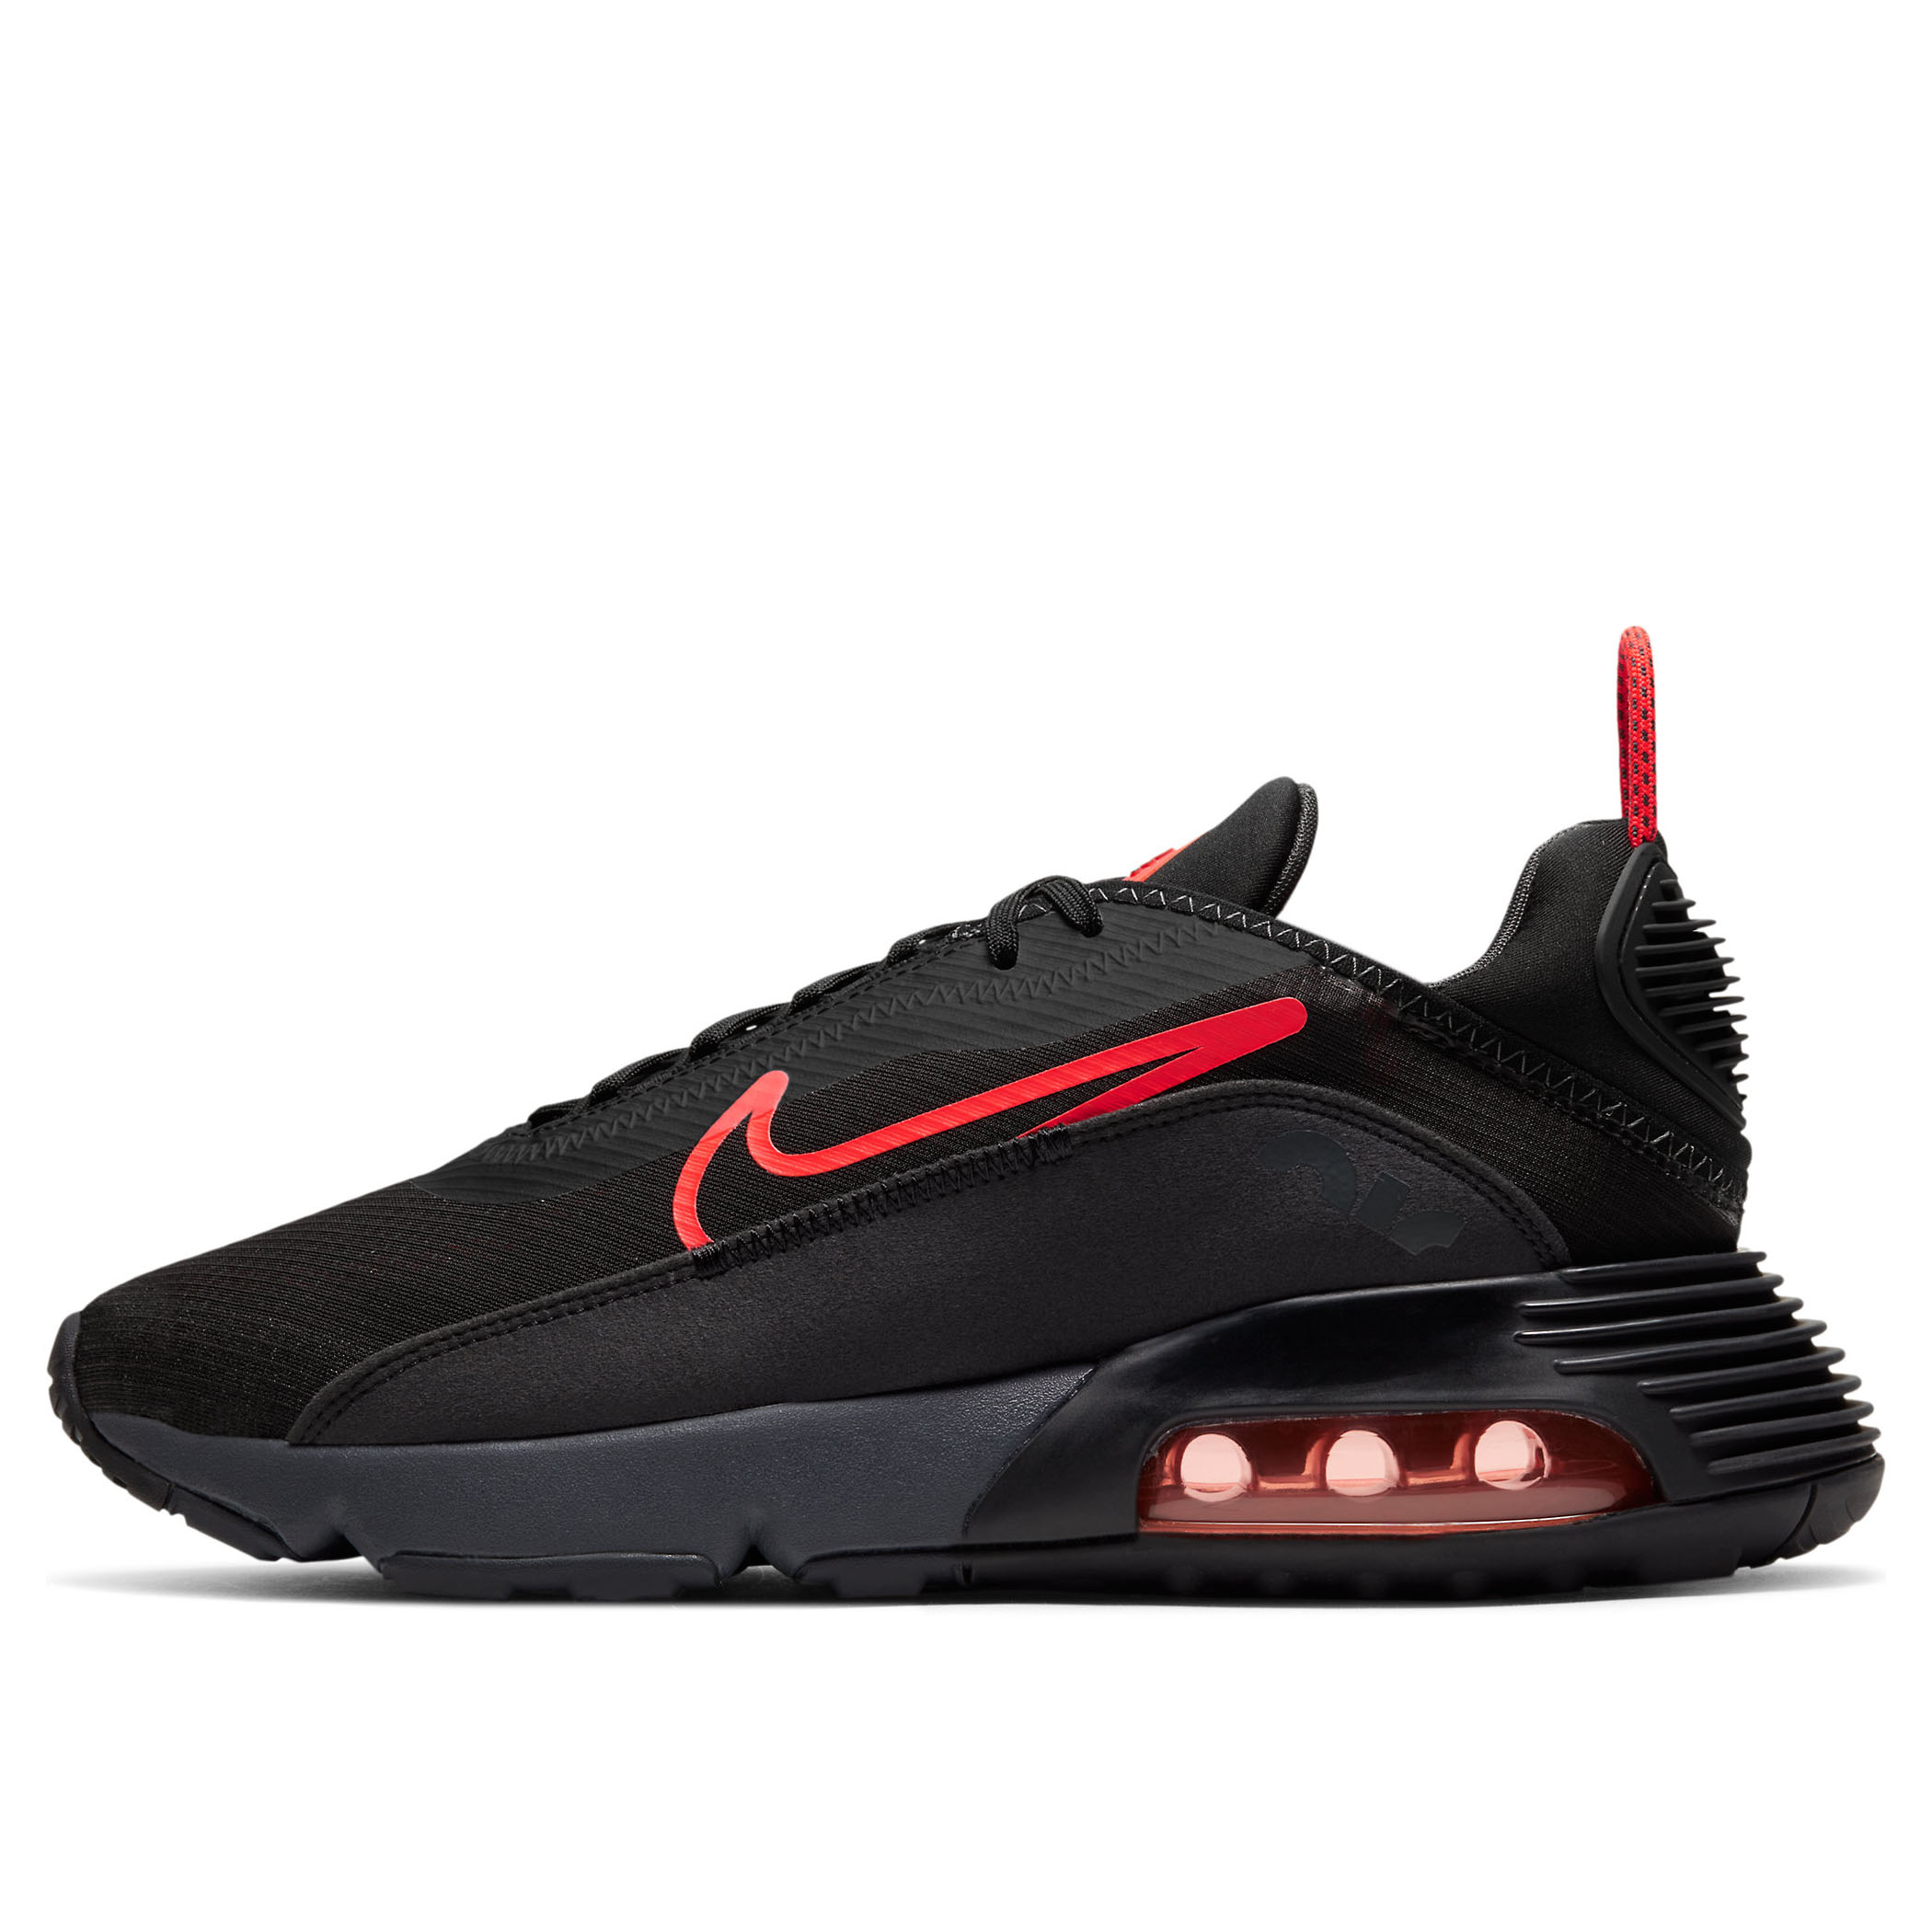 nike air max 2090 black and red